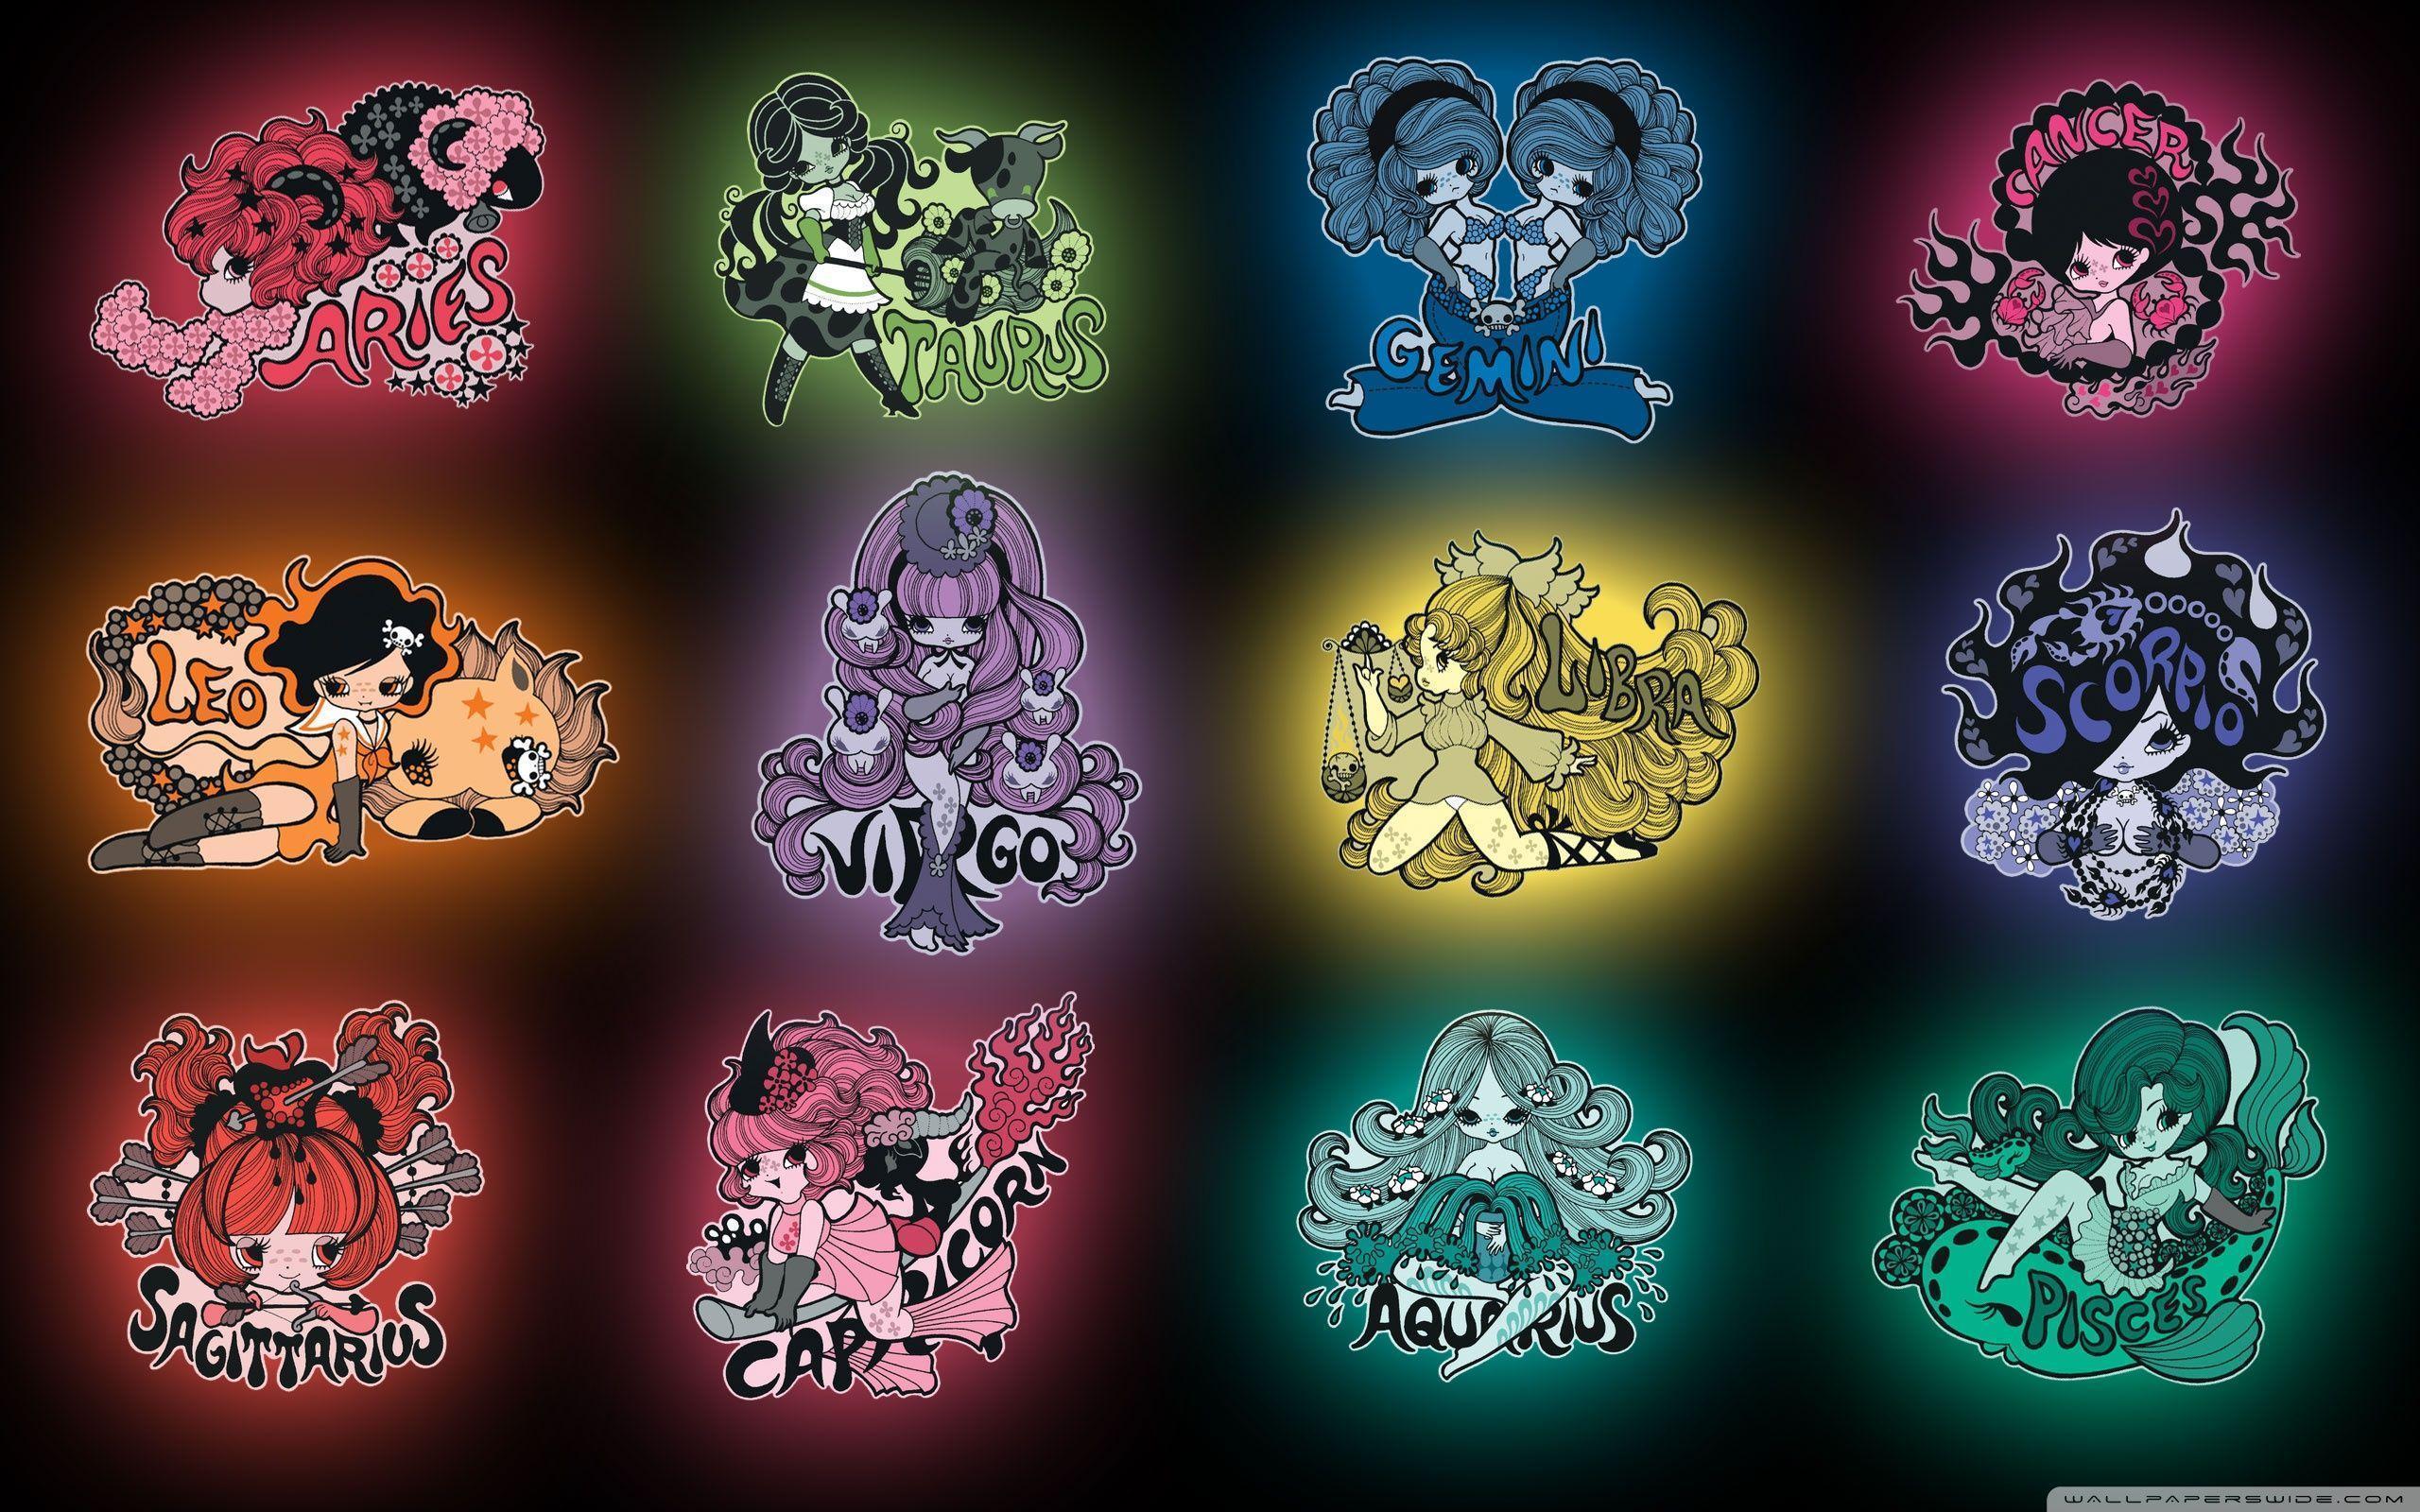 1920x1080 wallpaper with all 12 zodiac signs - Cancer, Pisces, Taurus, Aries